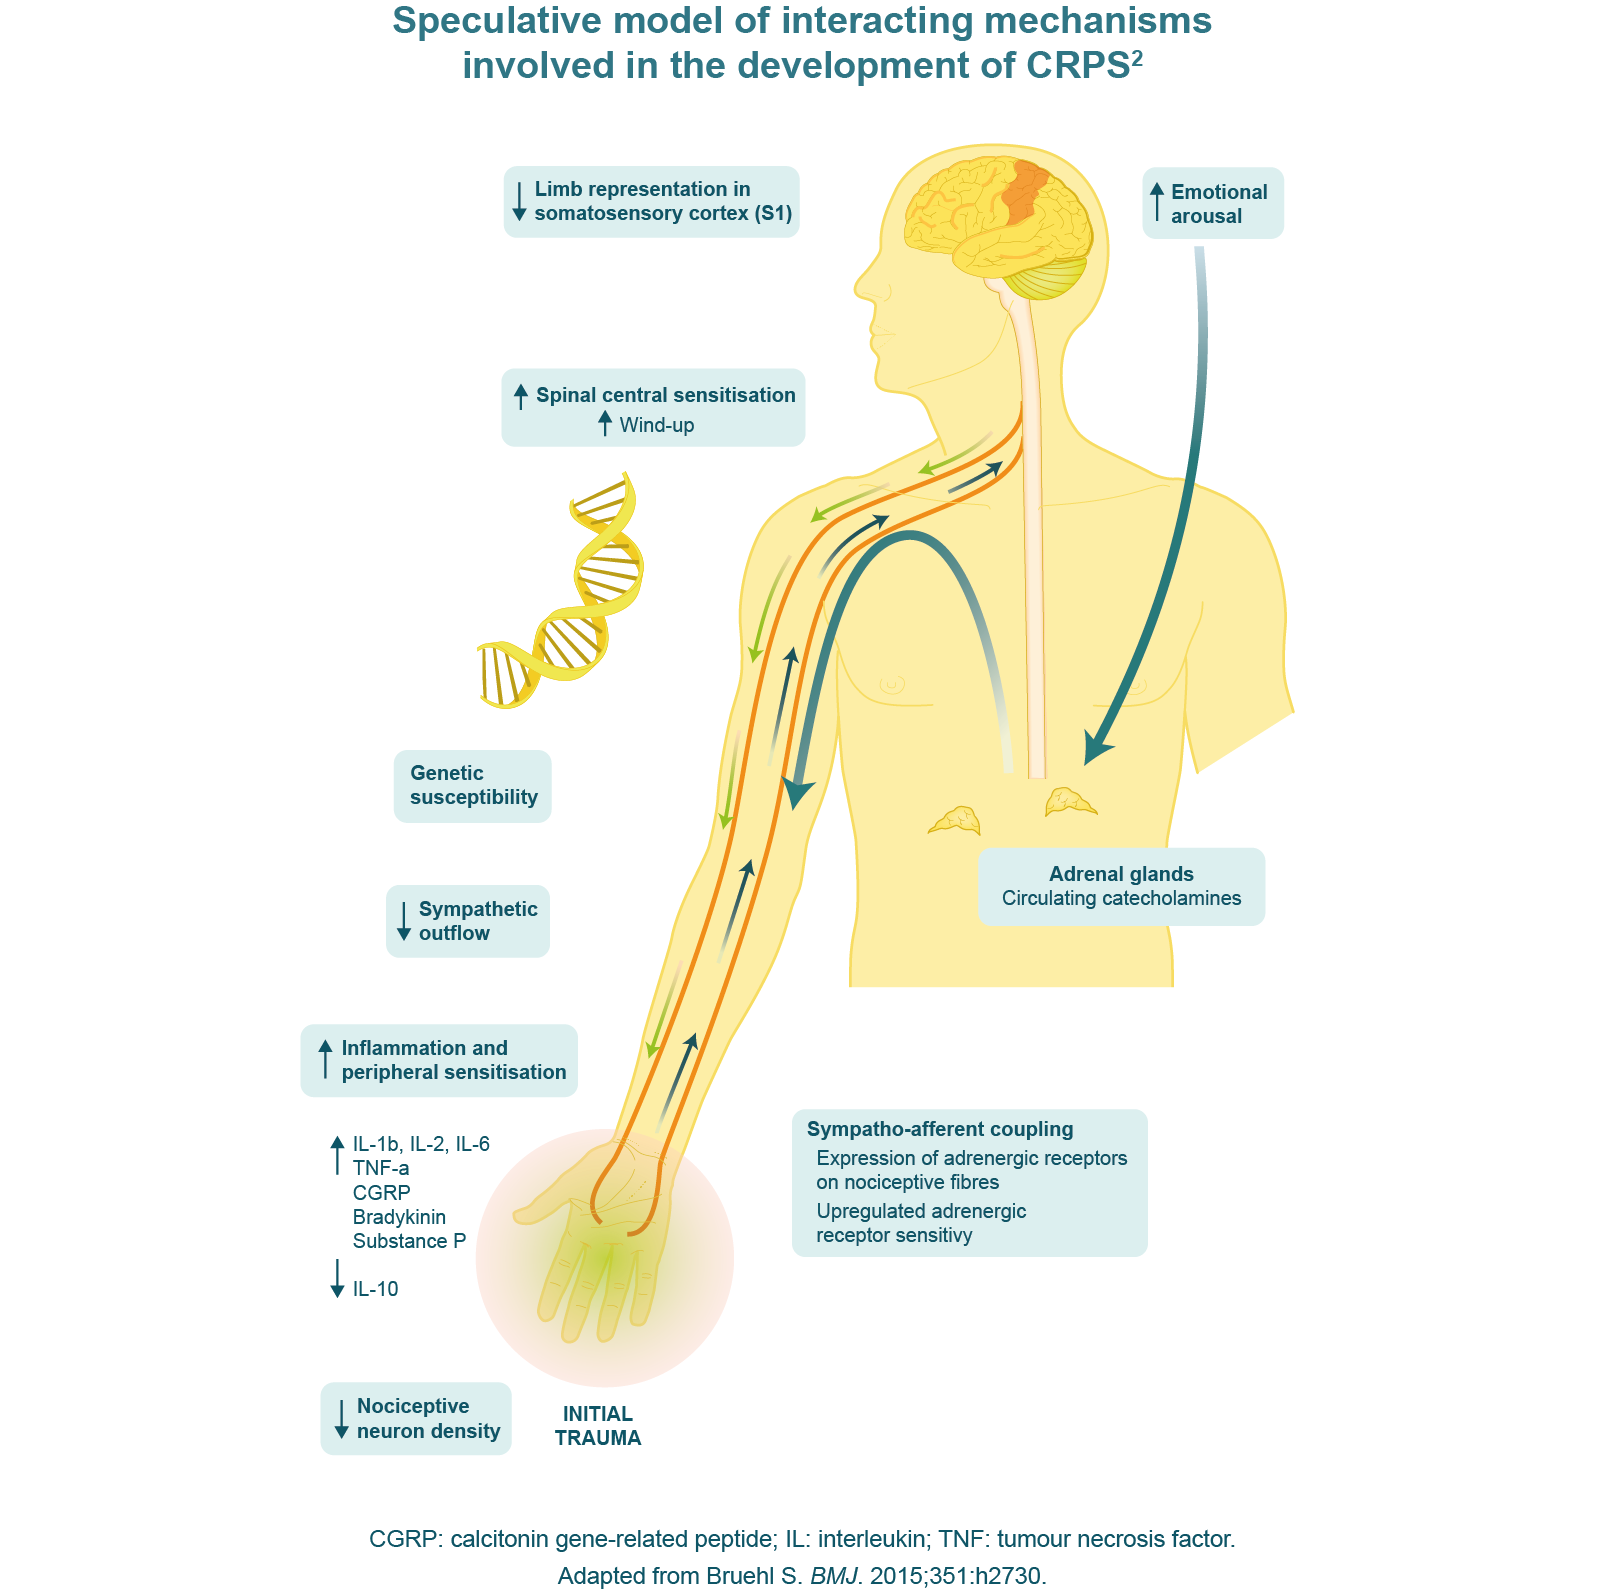 Speculative model of interactive mechanisms involved in the development of CRPS